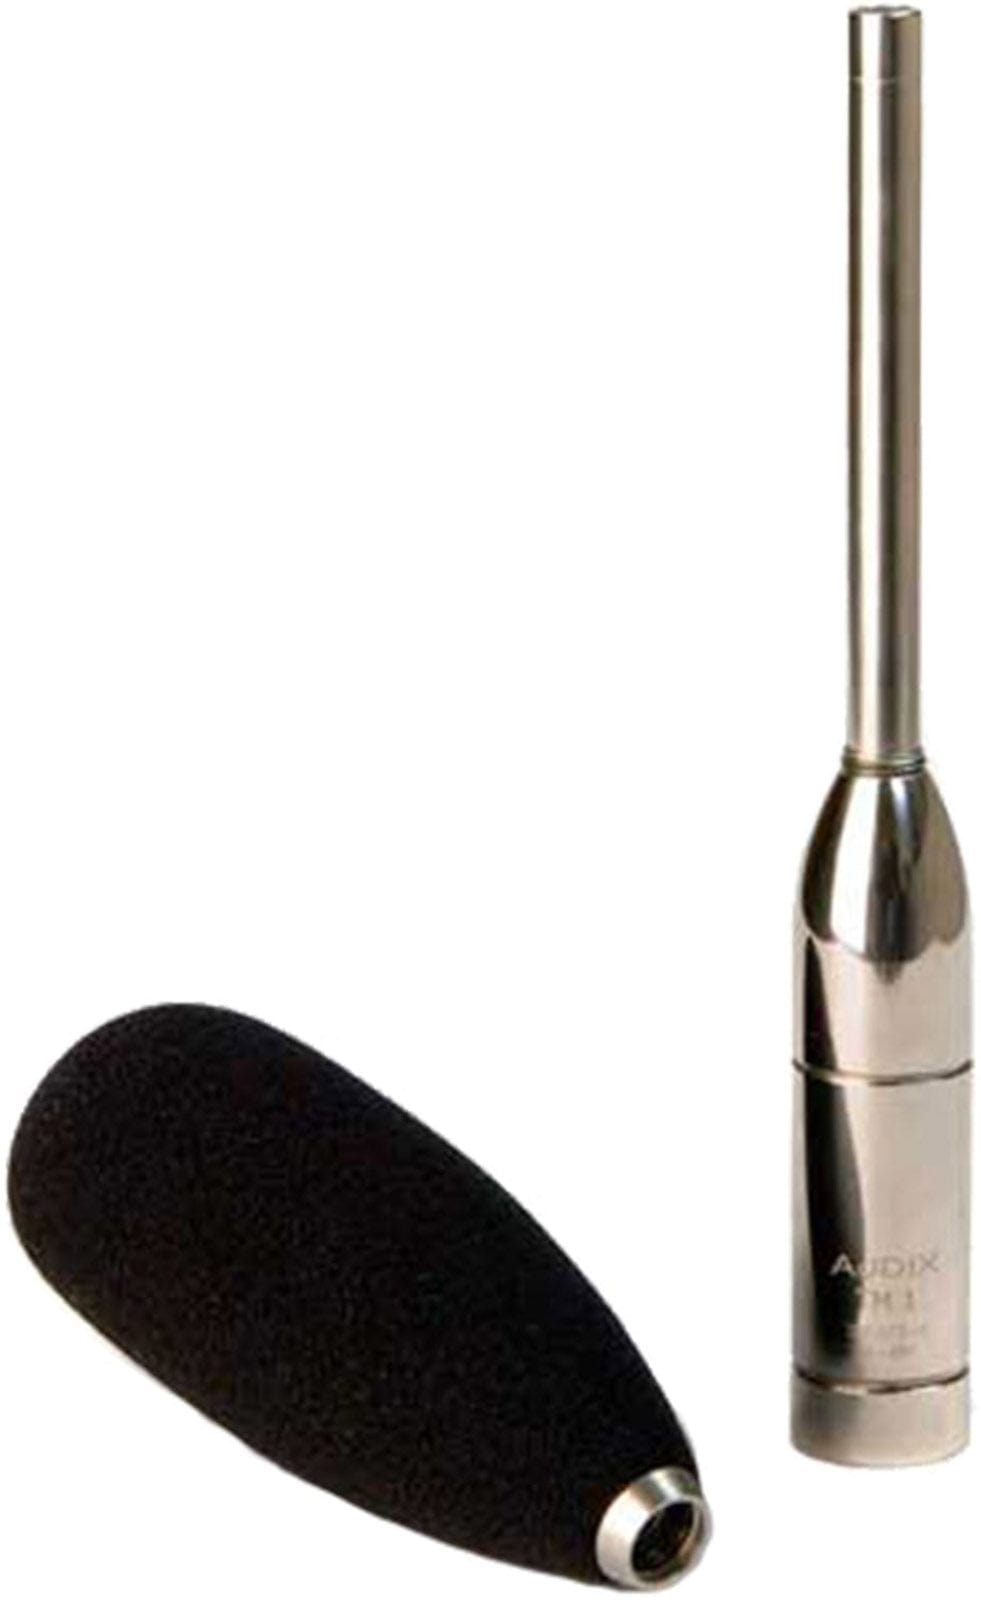 Audix TM1 Real Time Analyser Microphone - PSSL ProSound and Stage Lighting